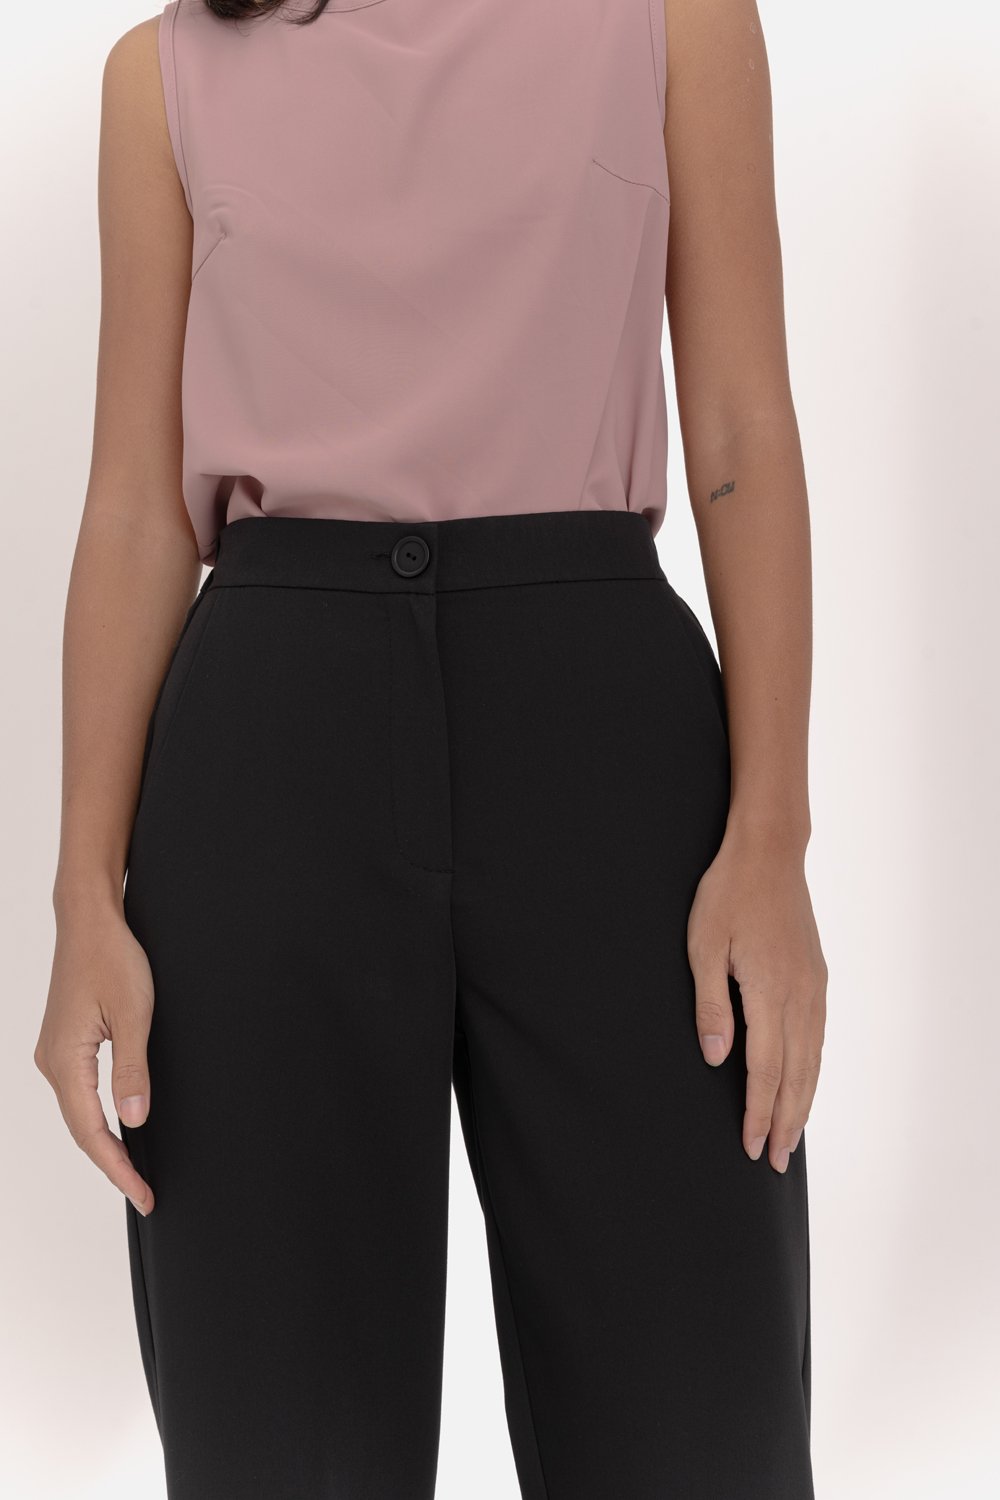 Black trousers with an elasticated waistband and pleats at the hem